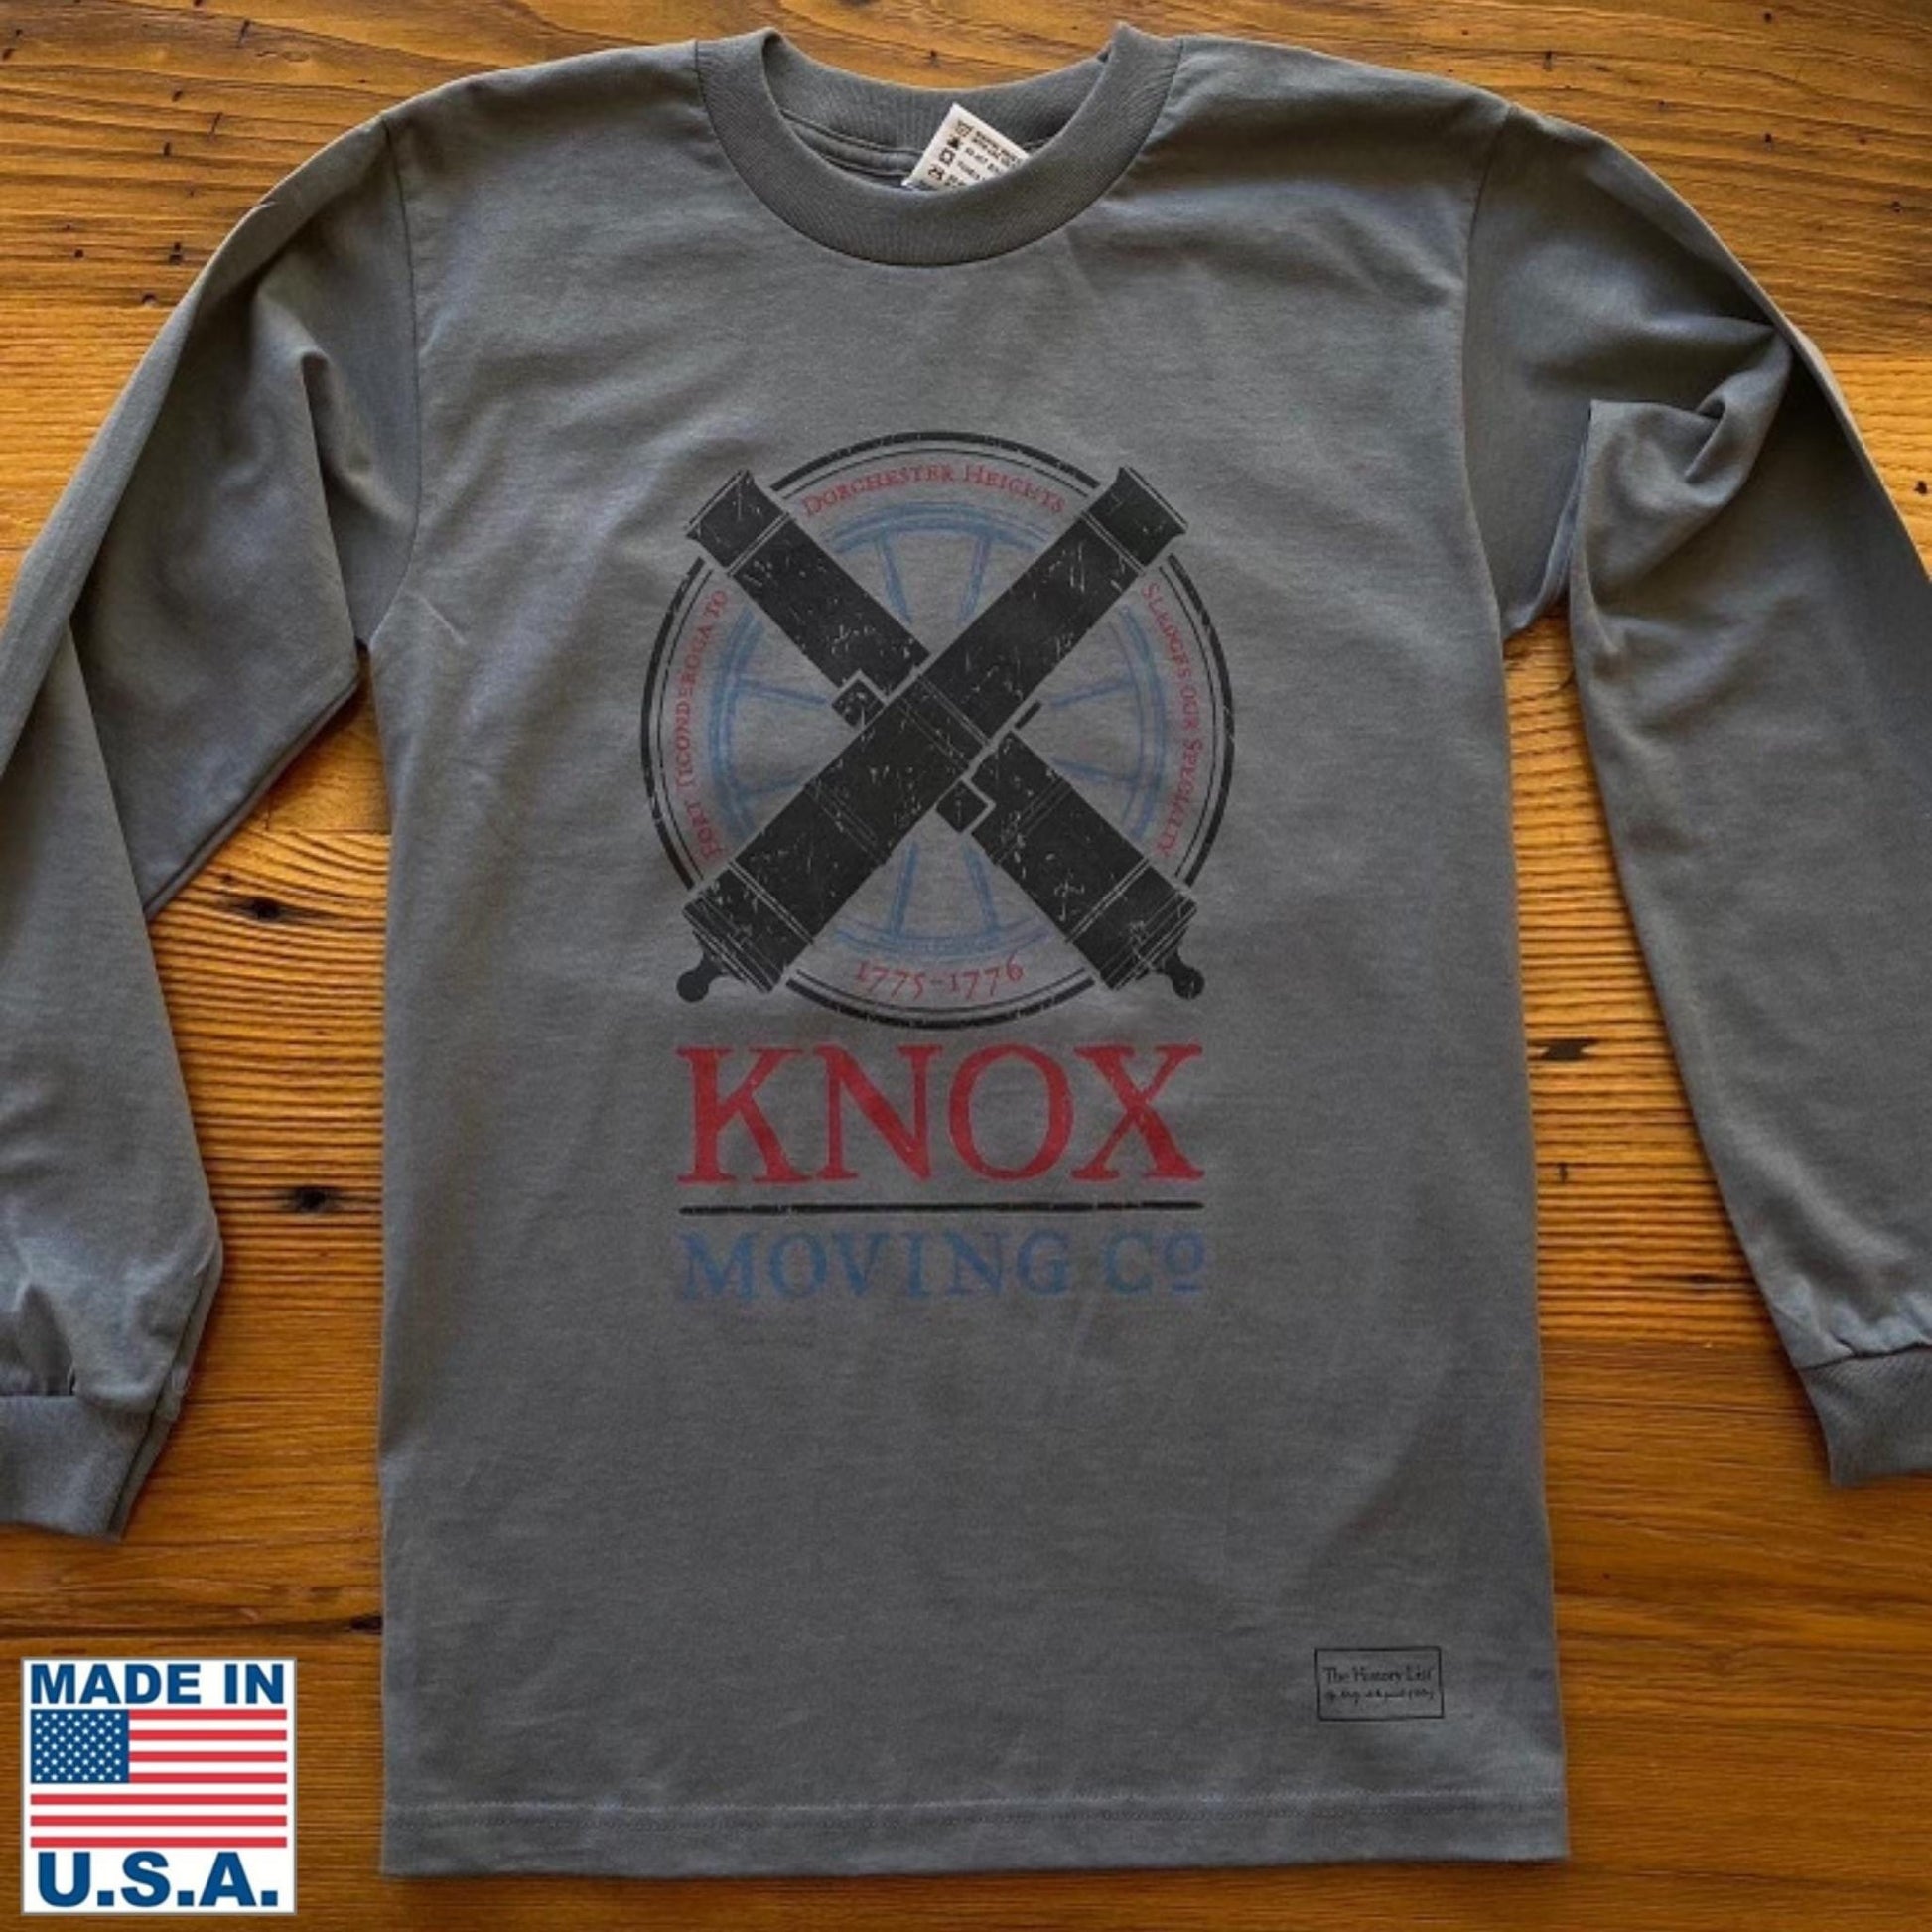 "Knox Moving Co." Long-sleeved shirt from the history list store